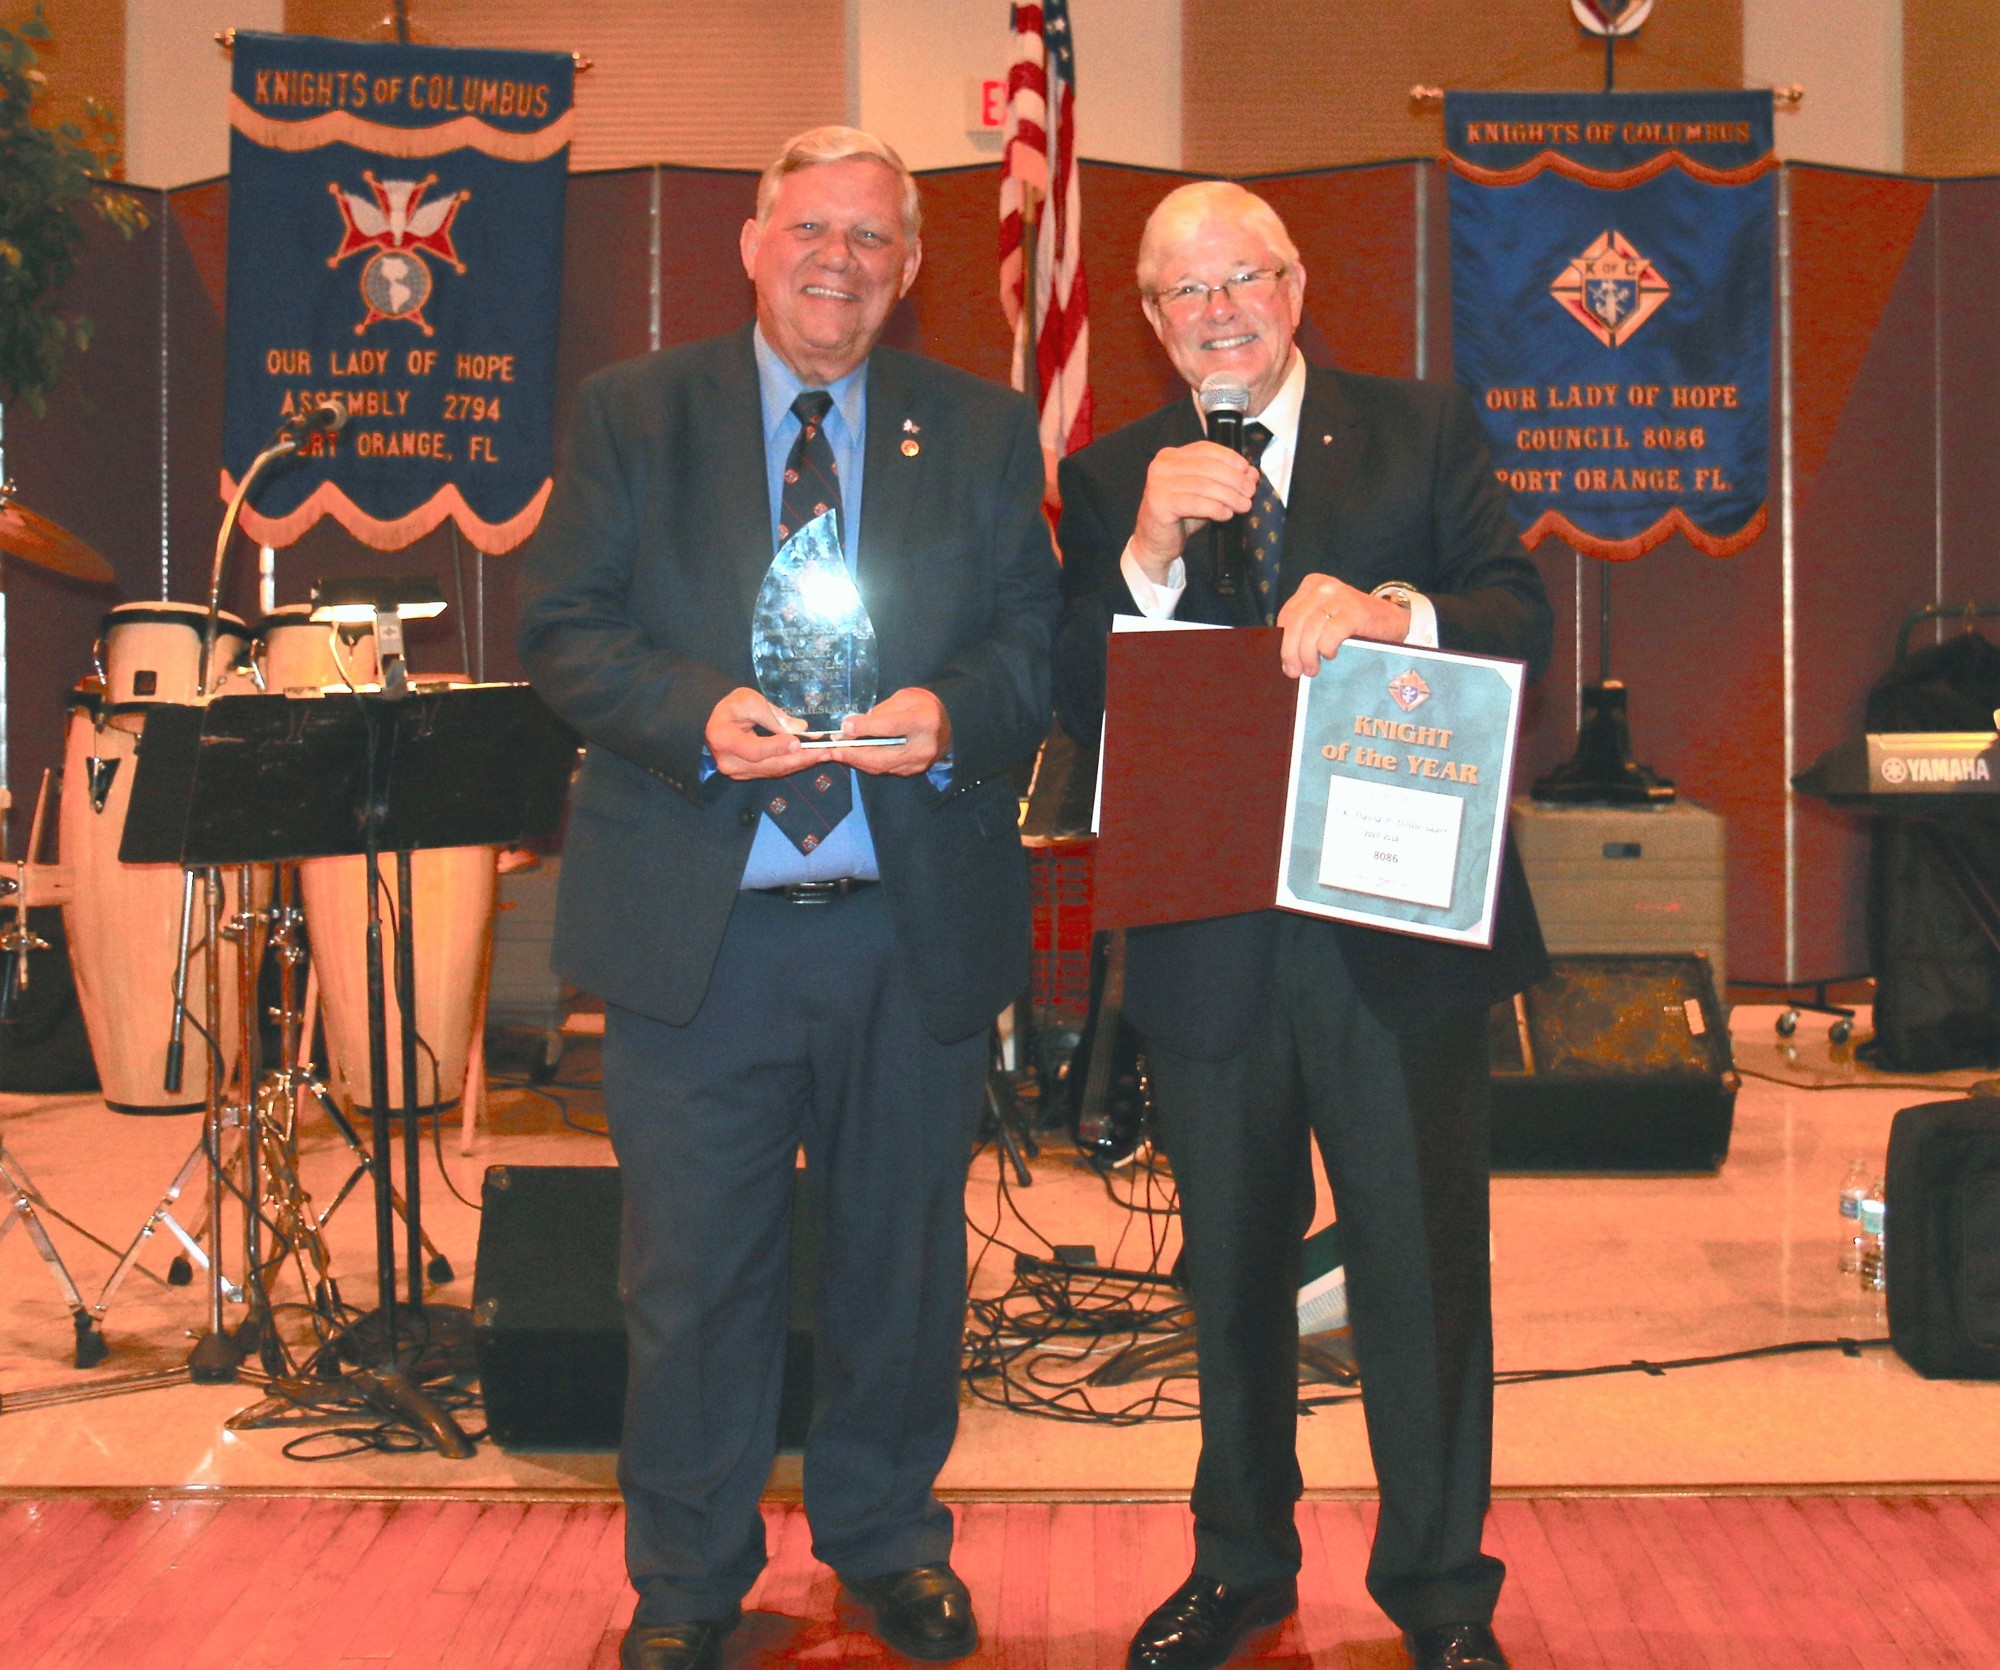 Our Lady of Hope Knights of Columbus Star Council 8086 honored the 2017-18 Knight of the Year to David Dollieslager during the organization's annual Fall Harvest Dinner Dance on Oct. 20. Courtesy photo